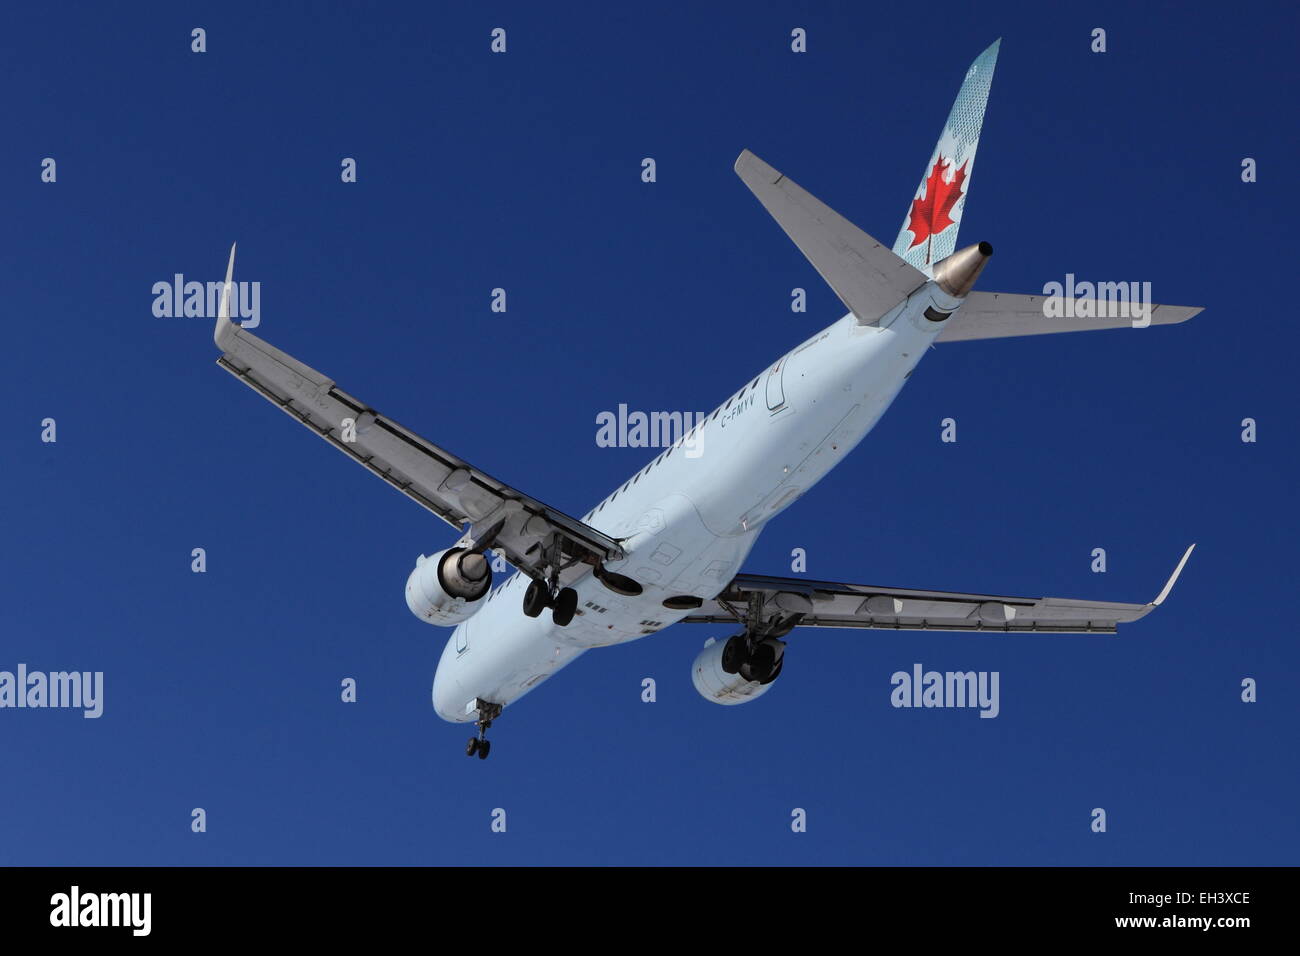 Embraer E190 C-FMYV Air Canada on final approach at YOW Ottawa Canada, March 5, 2015 Stock Photo